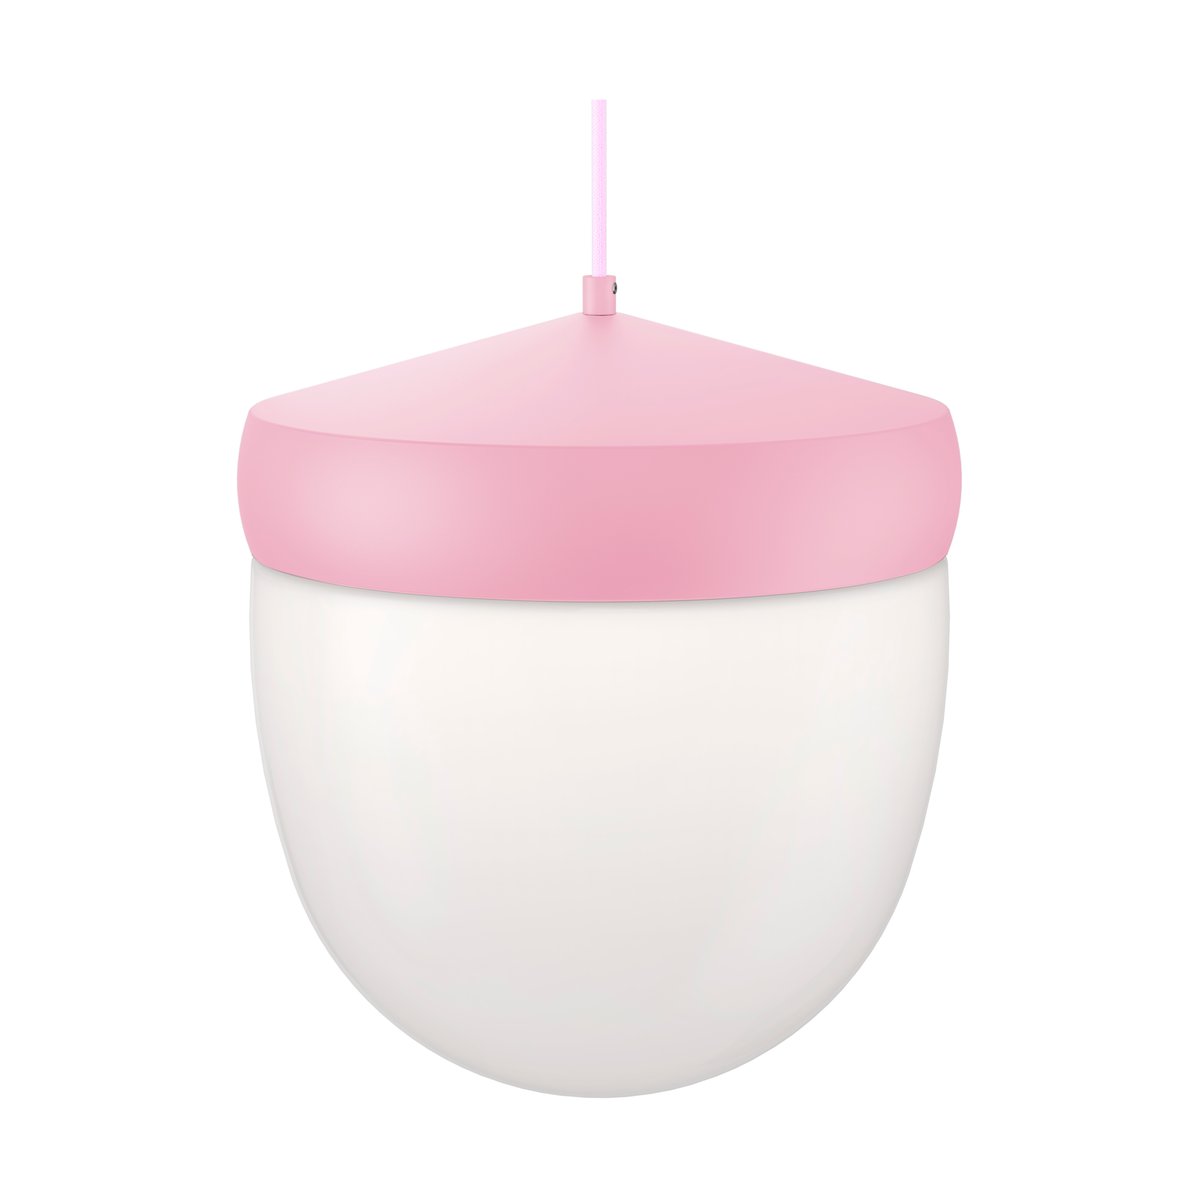 Noon Pan hanglamp frosted 30 cm Rosa-roze